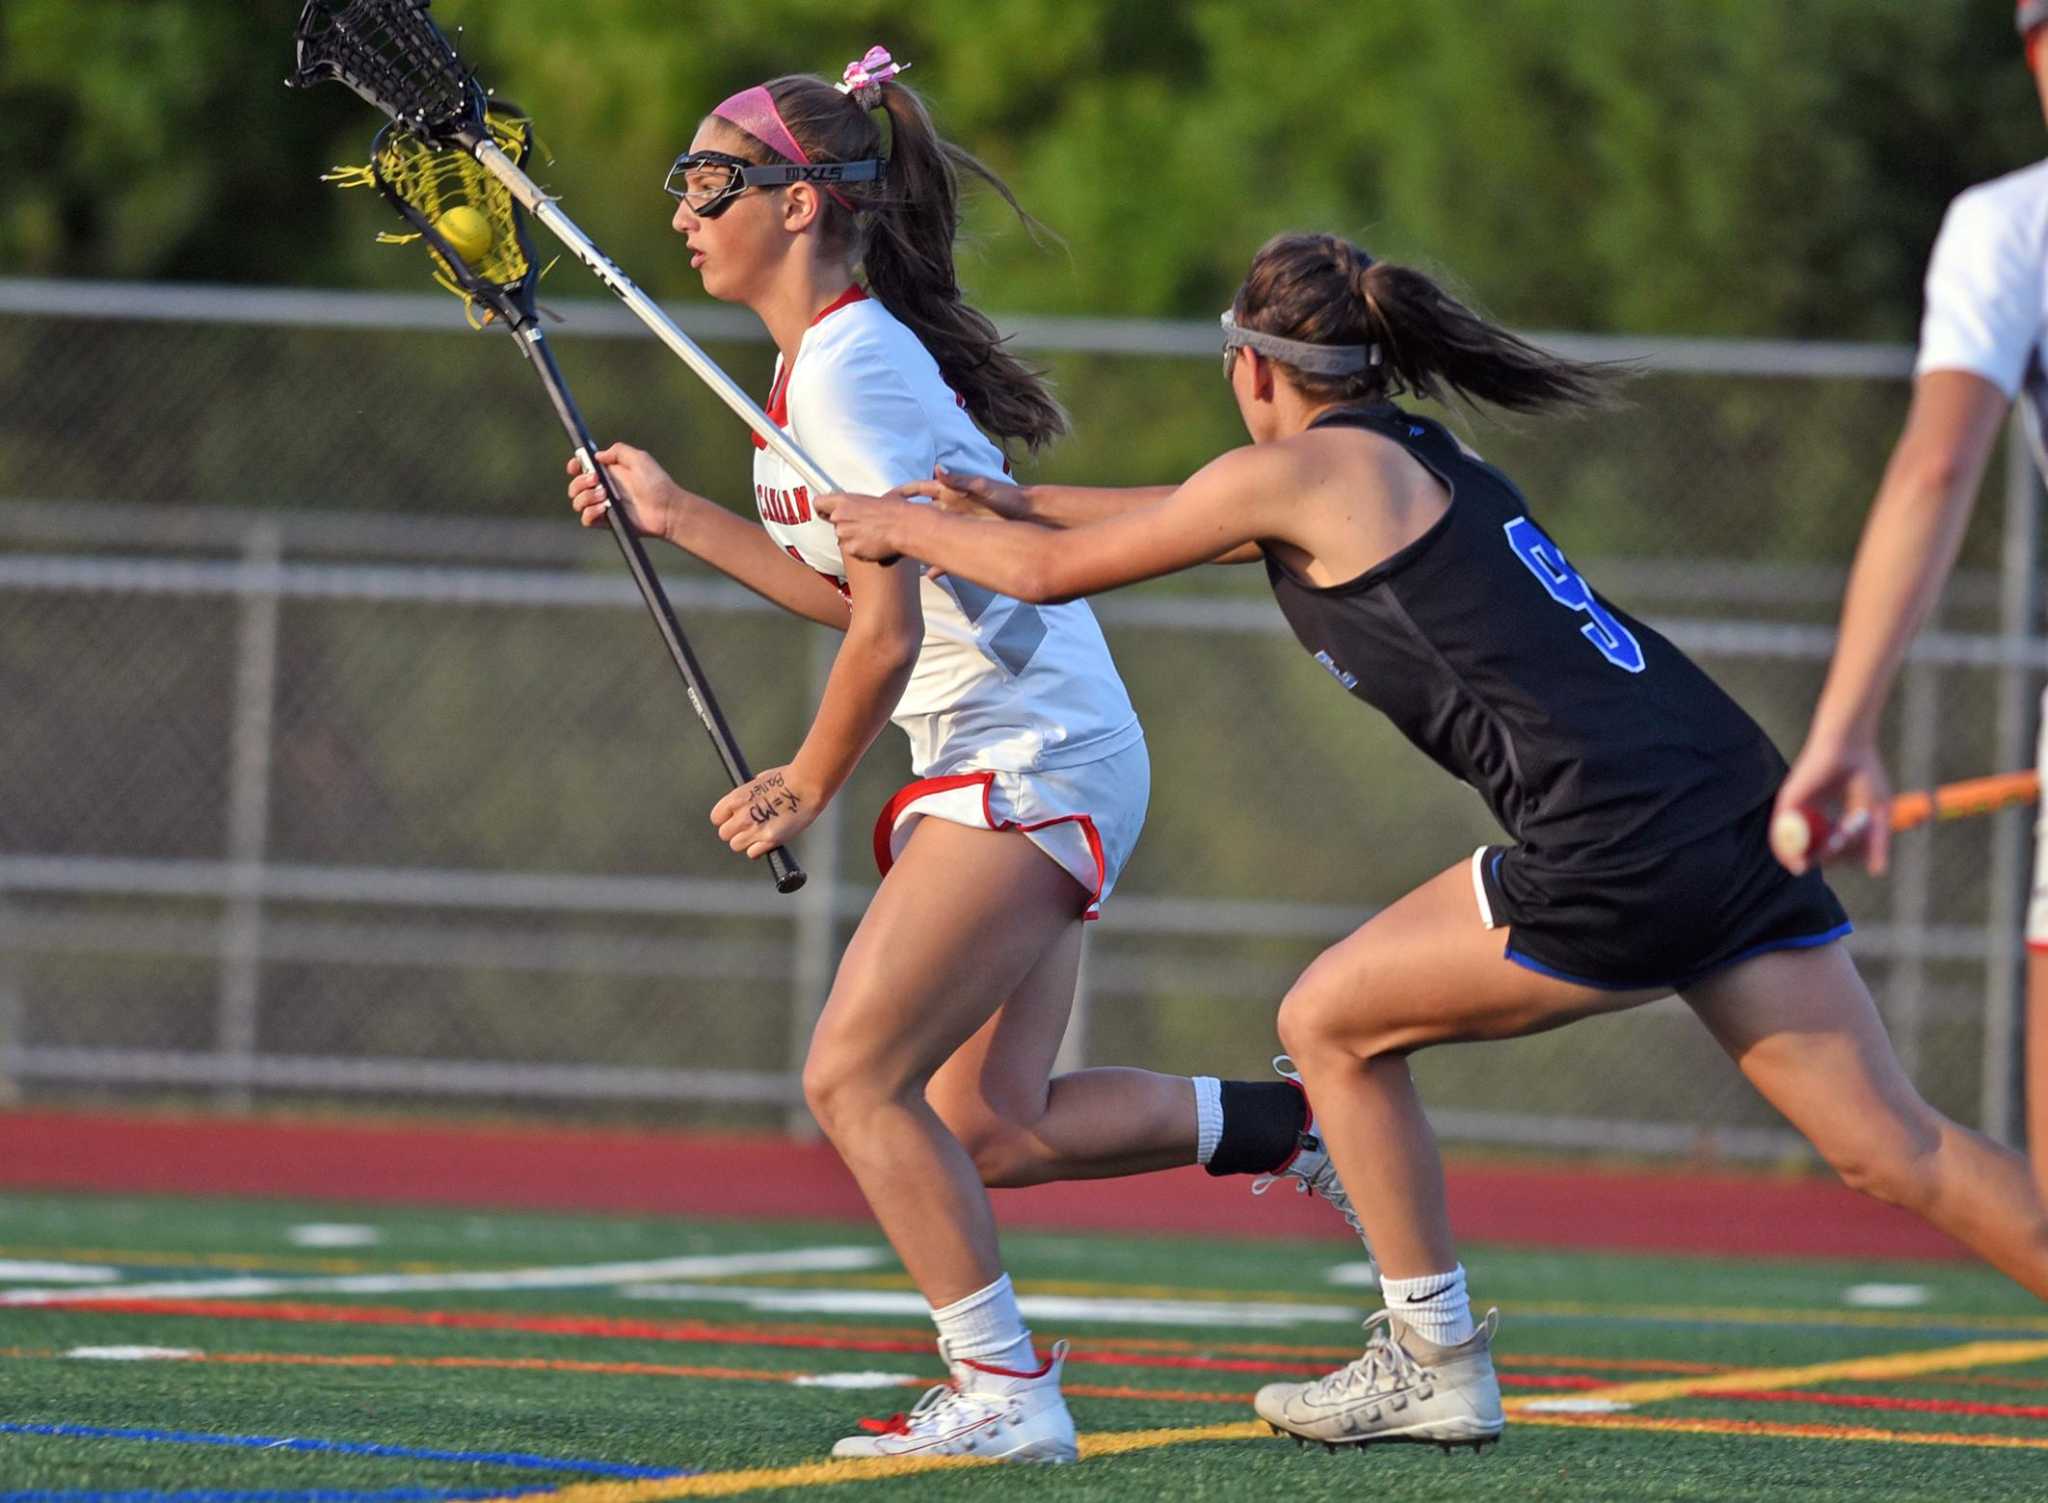 25 CIAC girls lacrosse players to watch in 2021